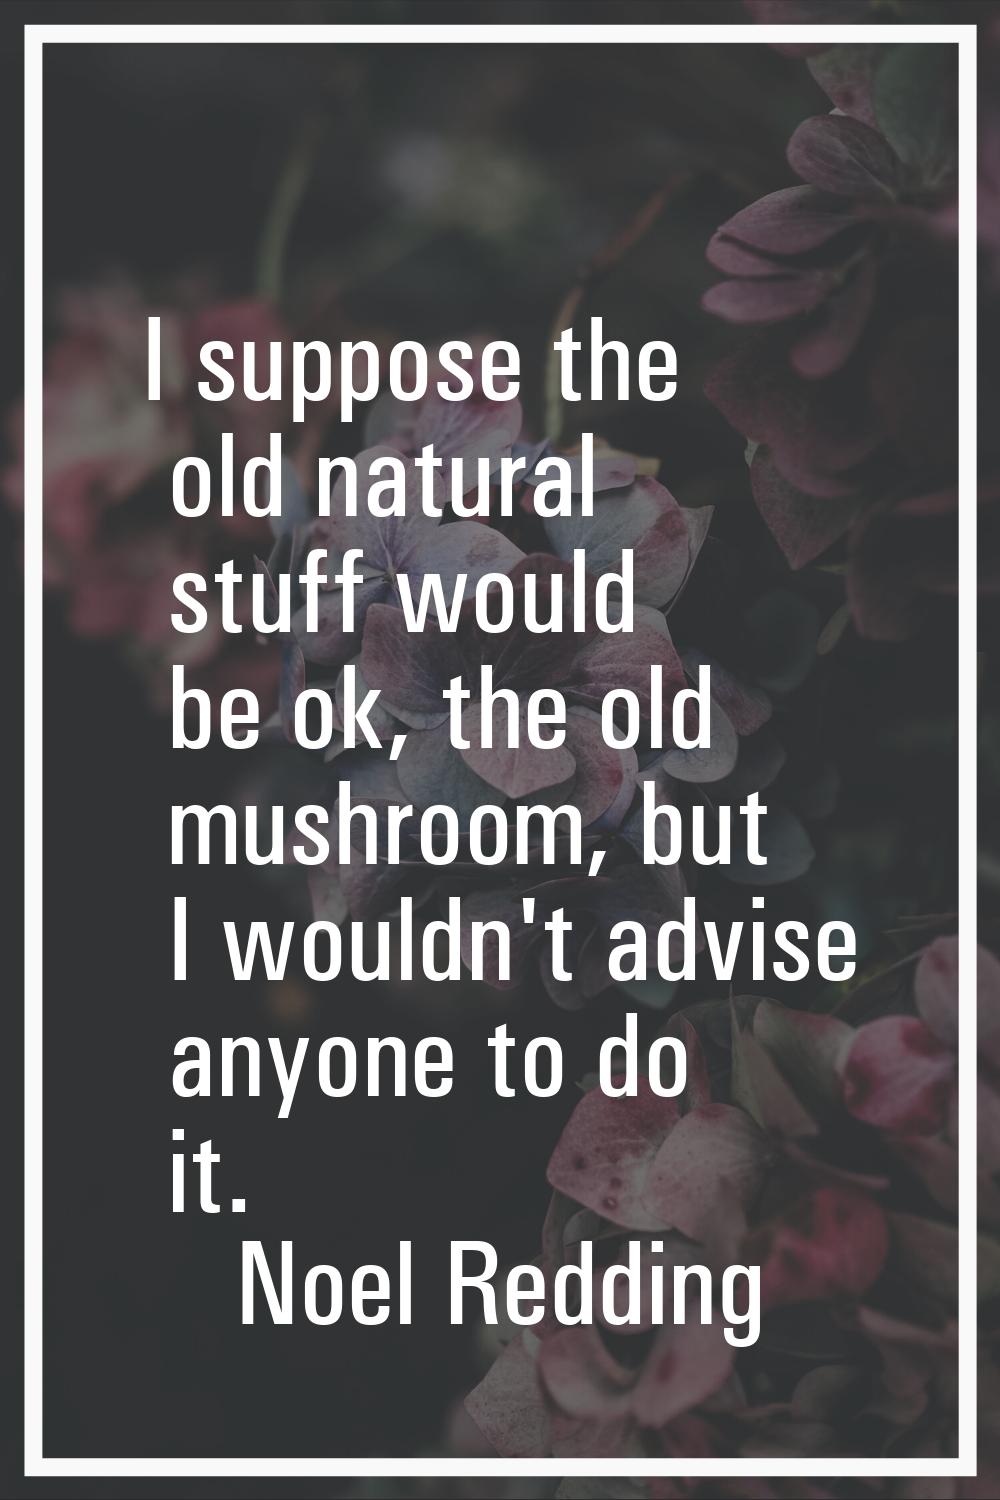 I suppose the old natural stuff would be ok, the old mushroom, but I wouldn't advise anyone to do i